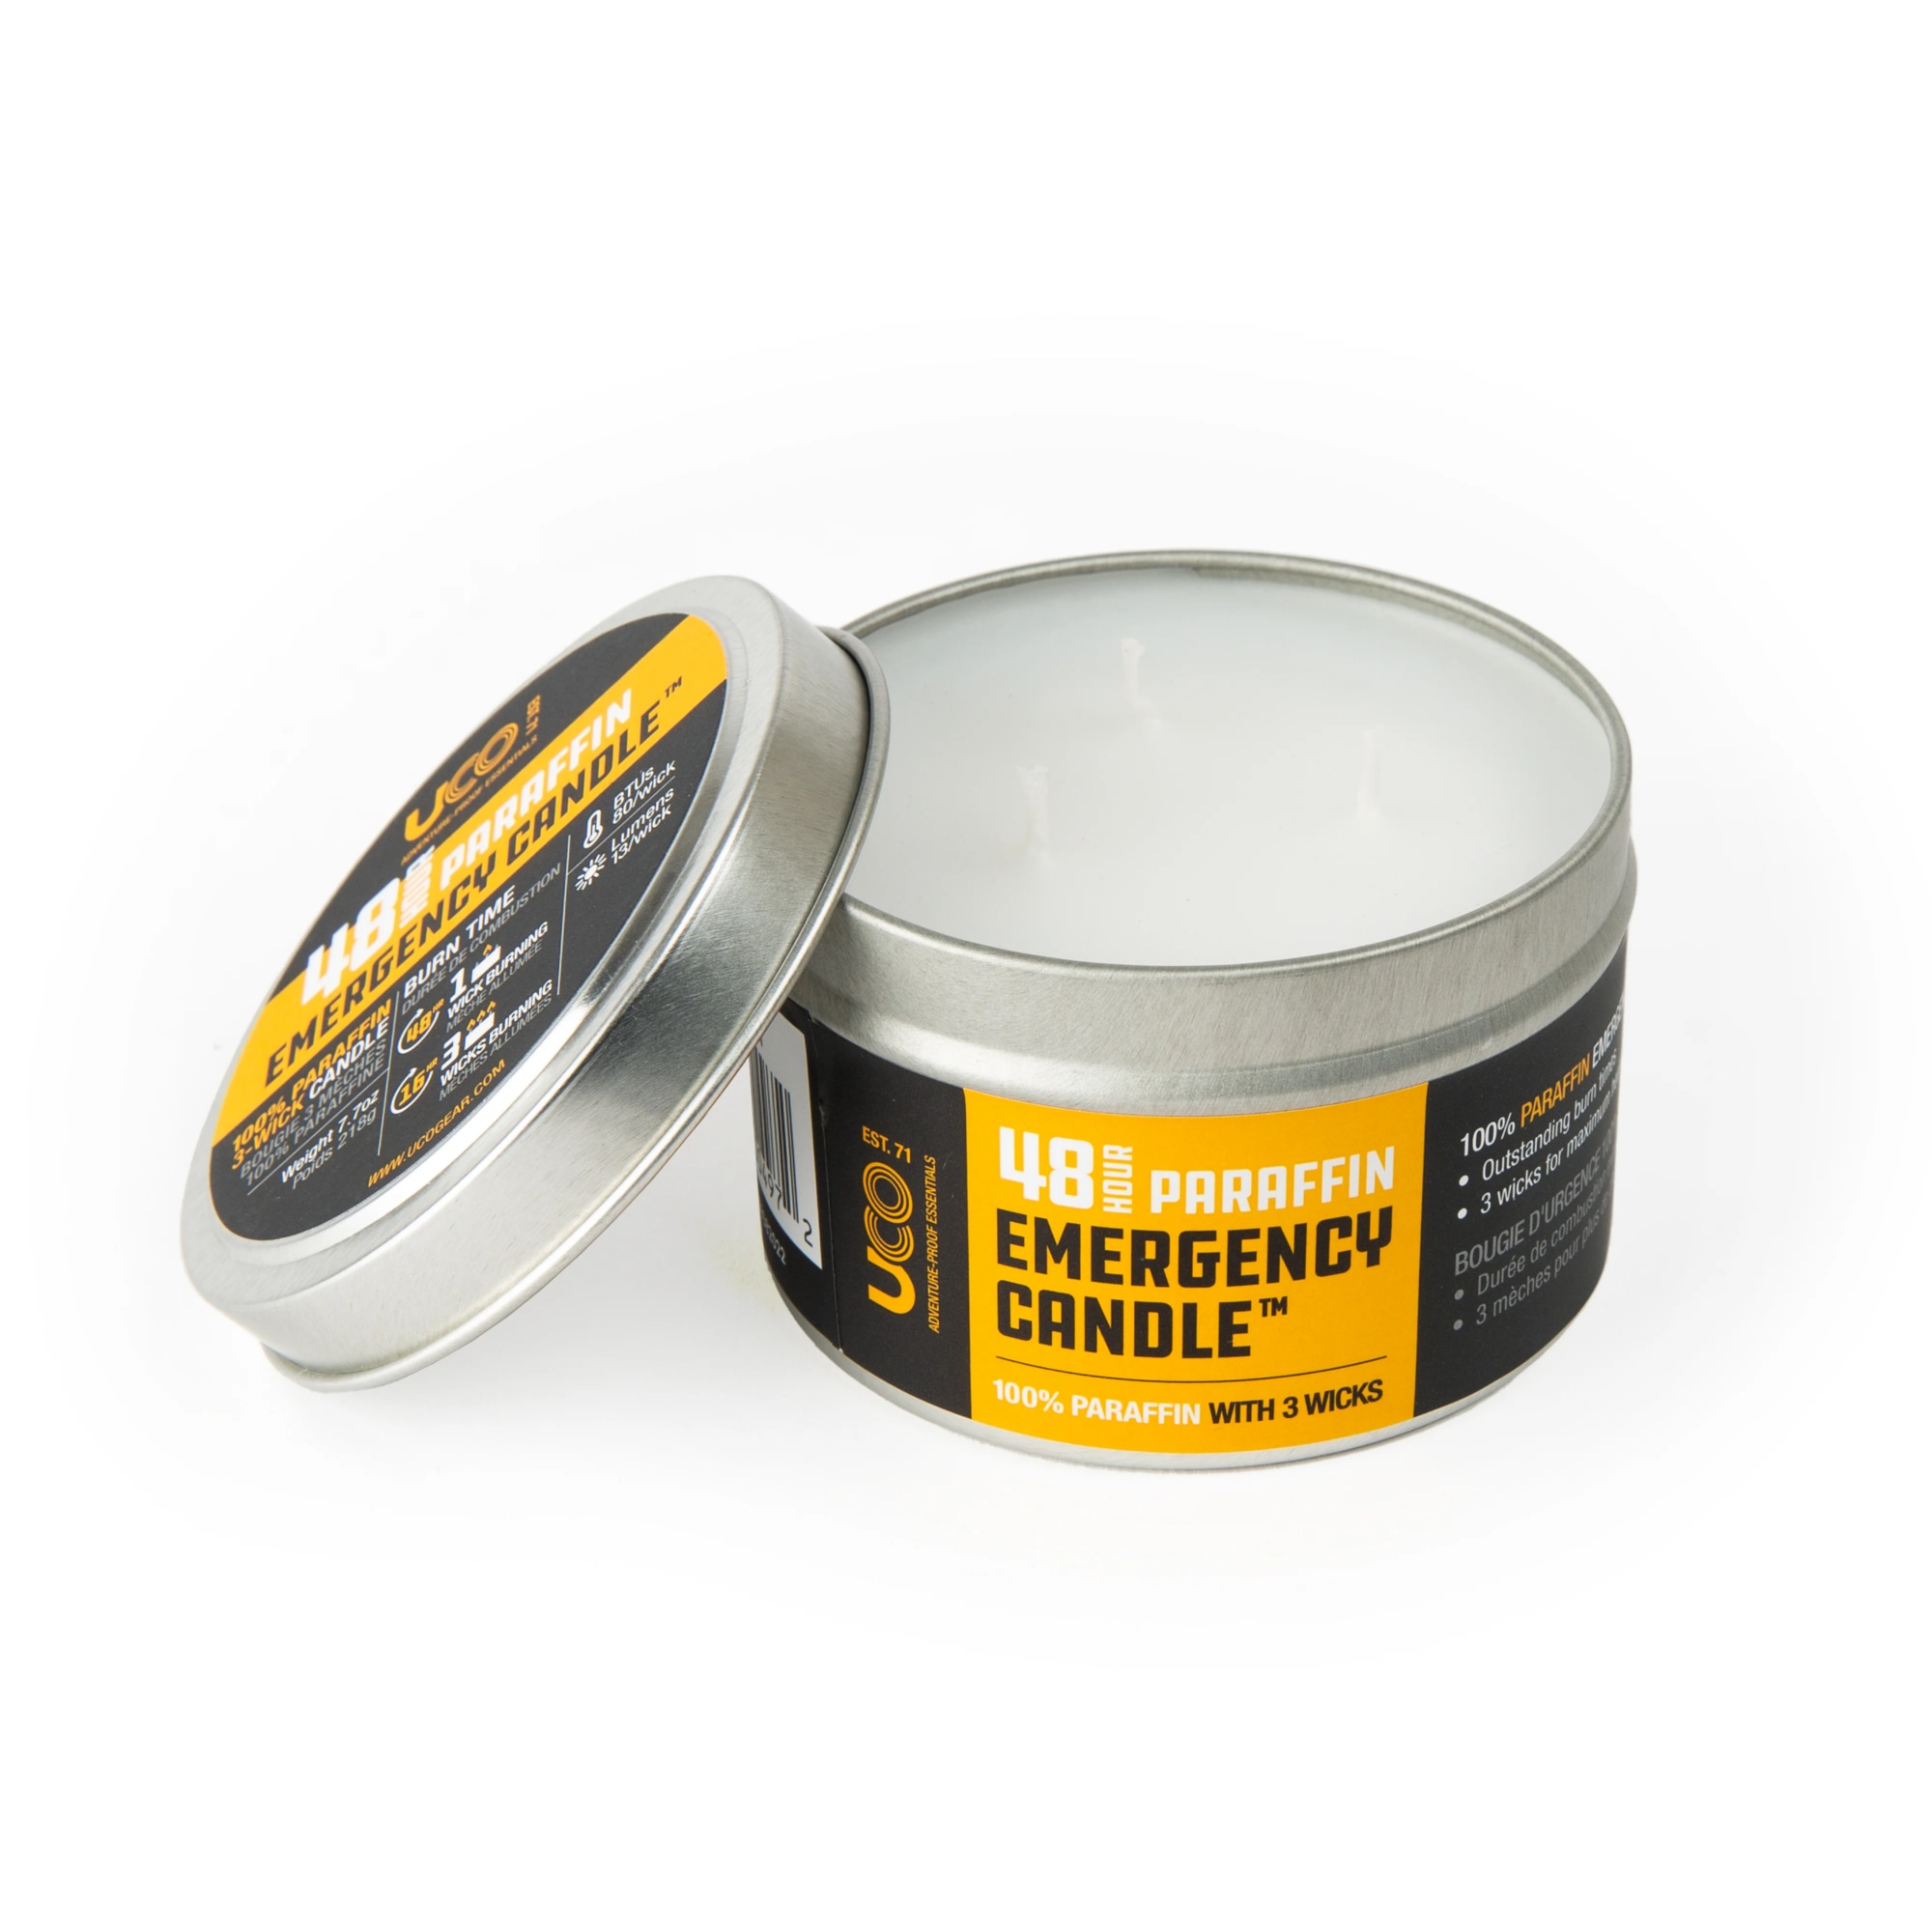 48 Hour Paraffin Emergency Candle